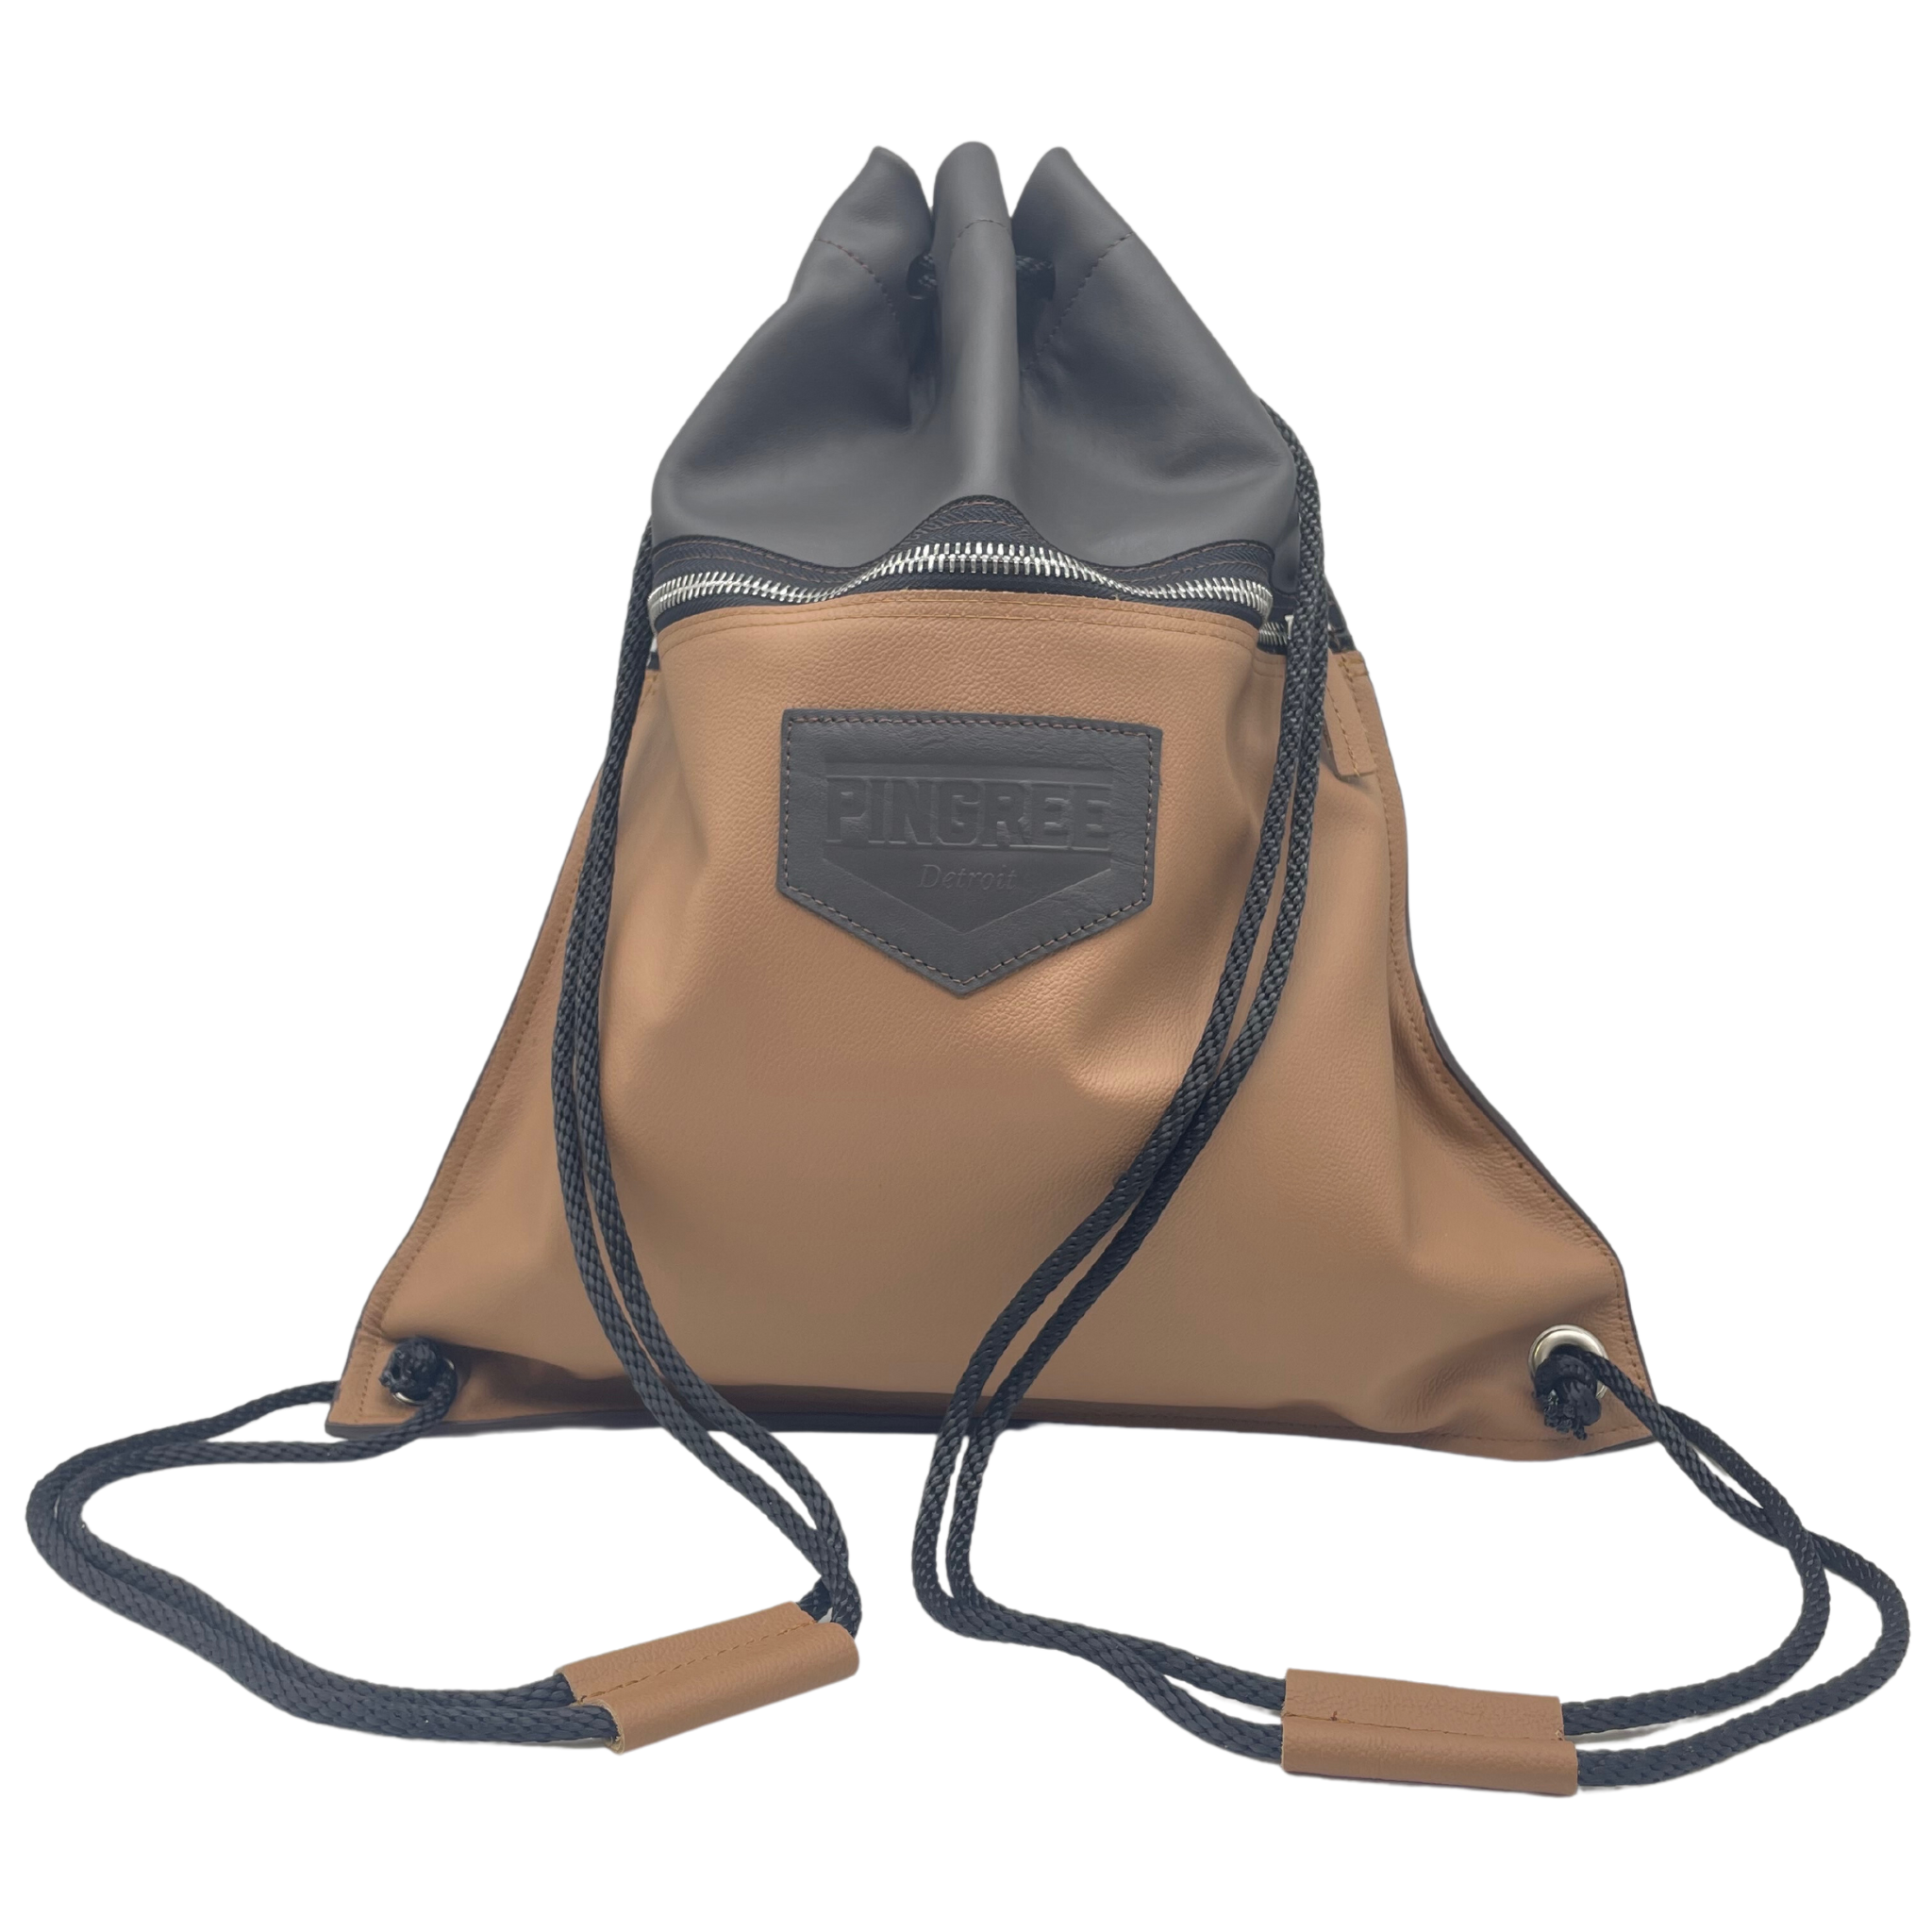 Detroit Drawstring Backpack in Leather